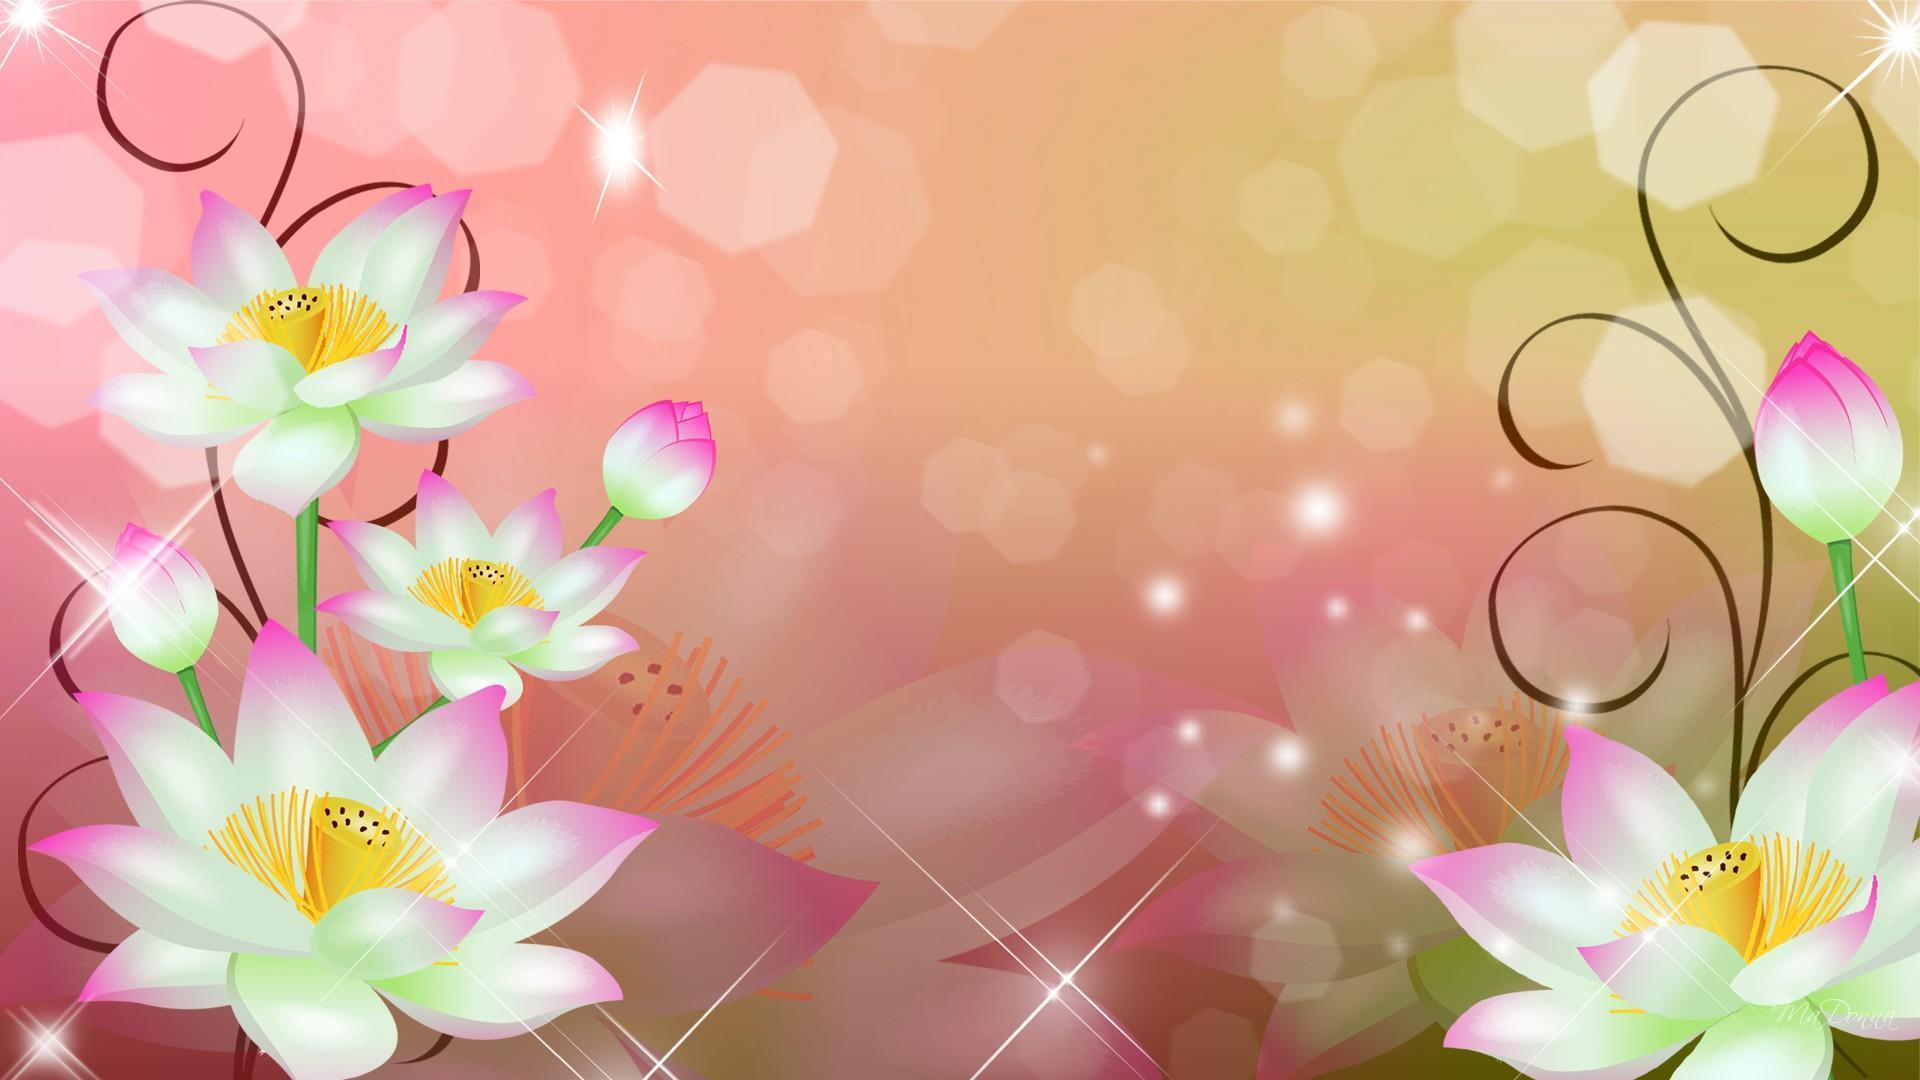 Wallpapers Image Of Flowers